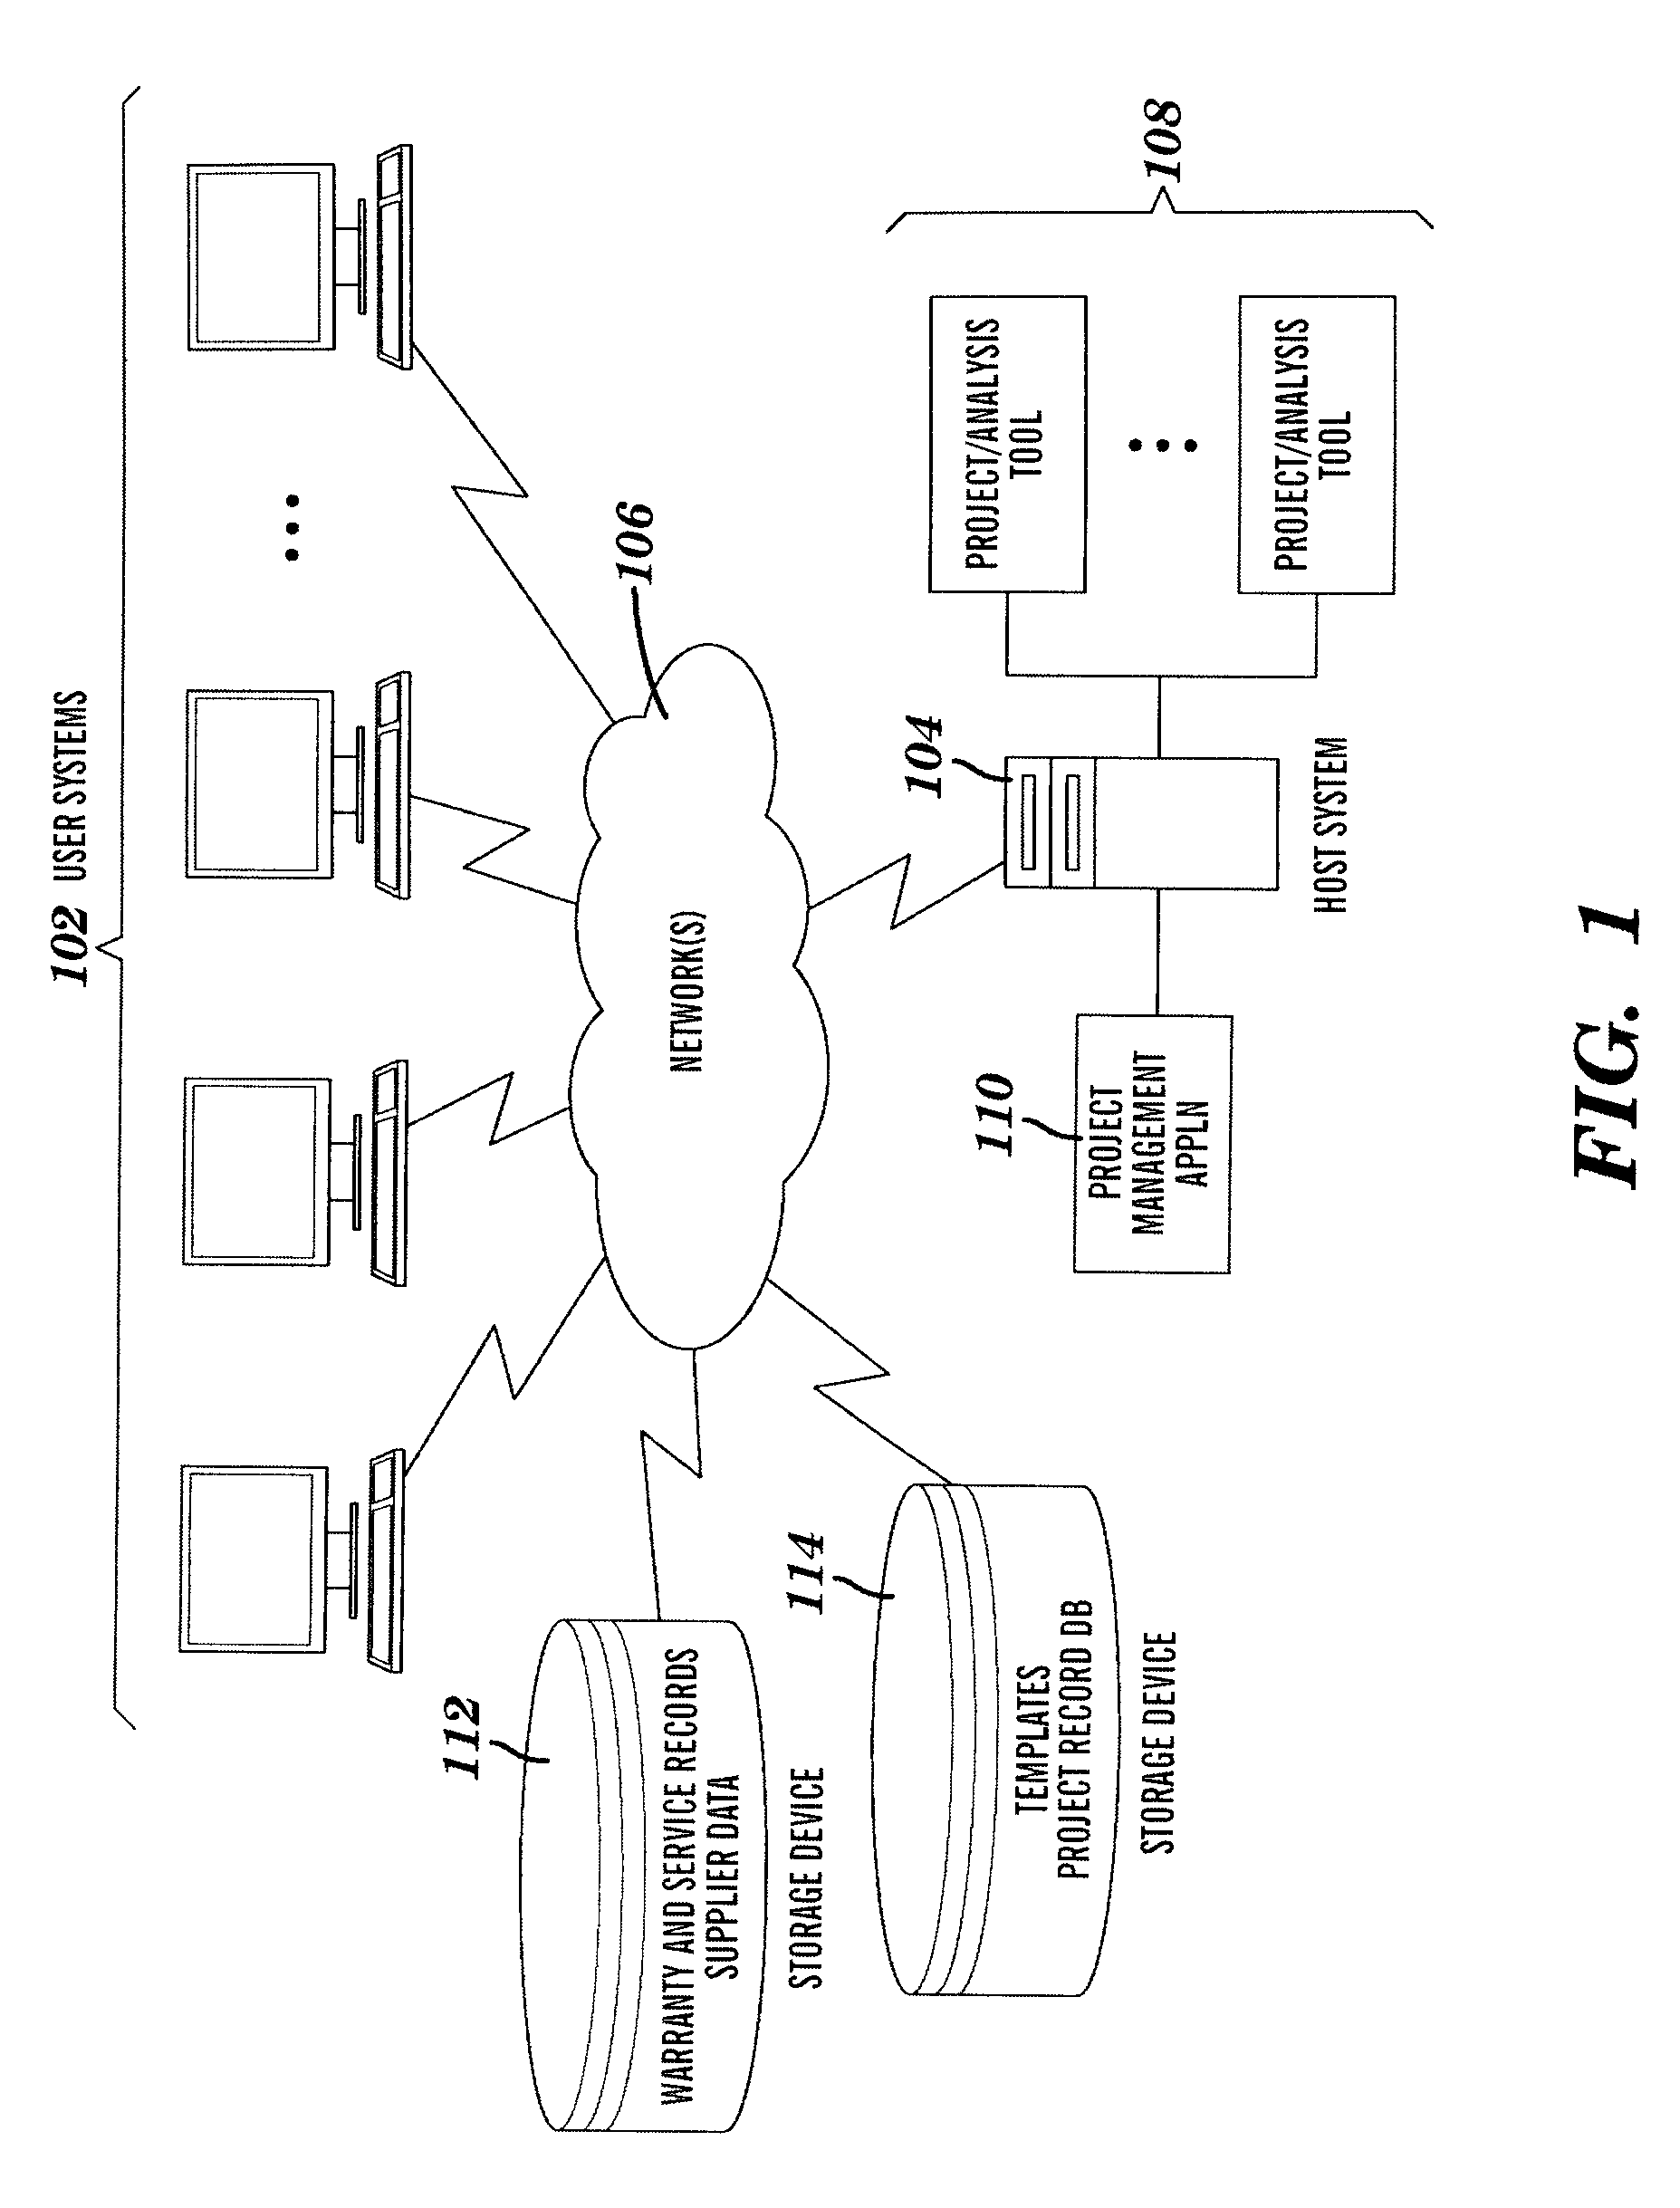 Methods, systems, and computer program products for implementing an end-to-end project management system